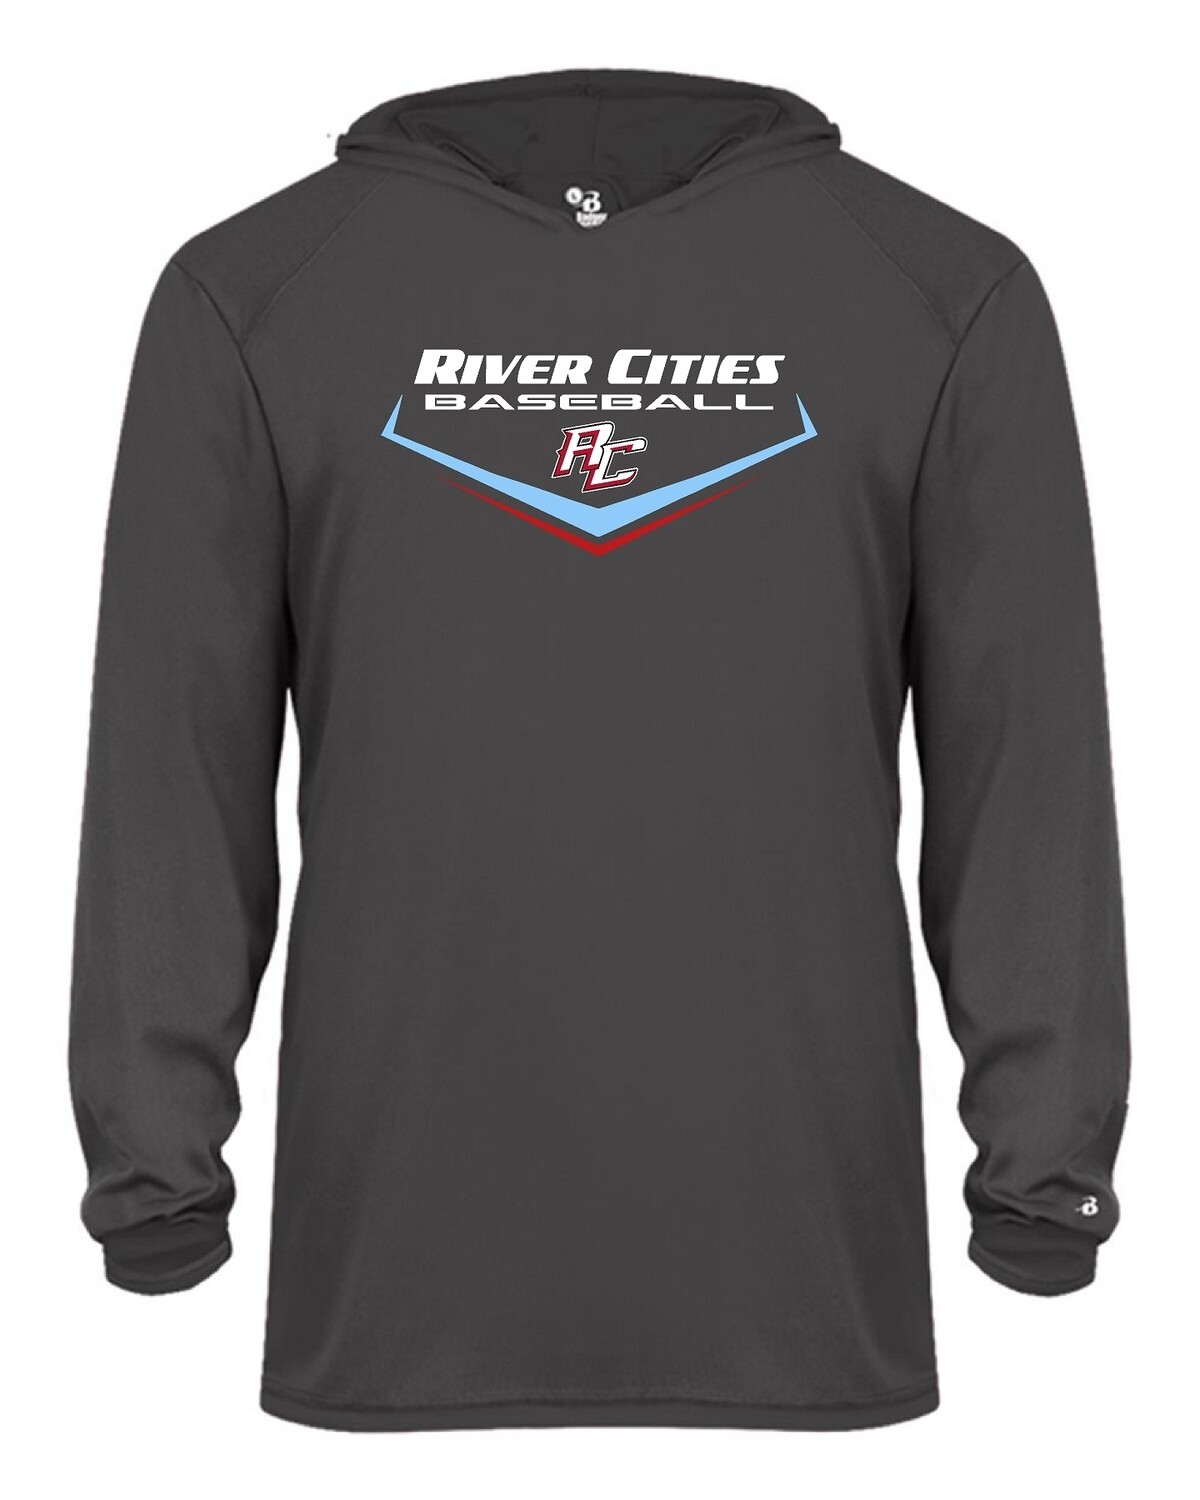 Badger - Youth B-Core Long Sleeve Hooded T-Shirt - River Cities